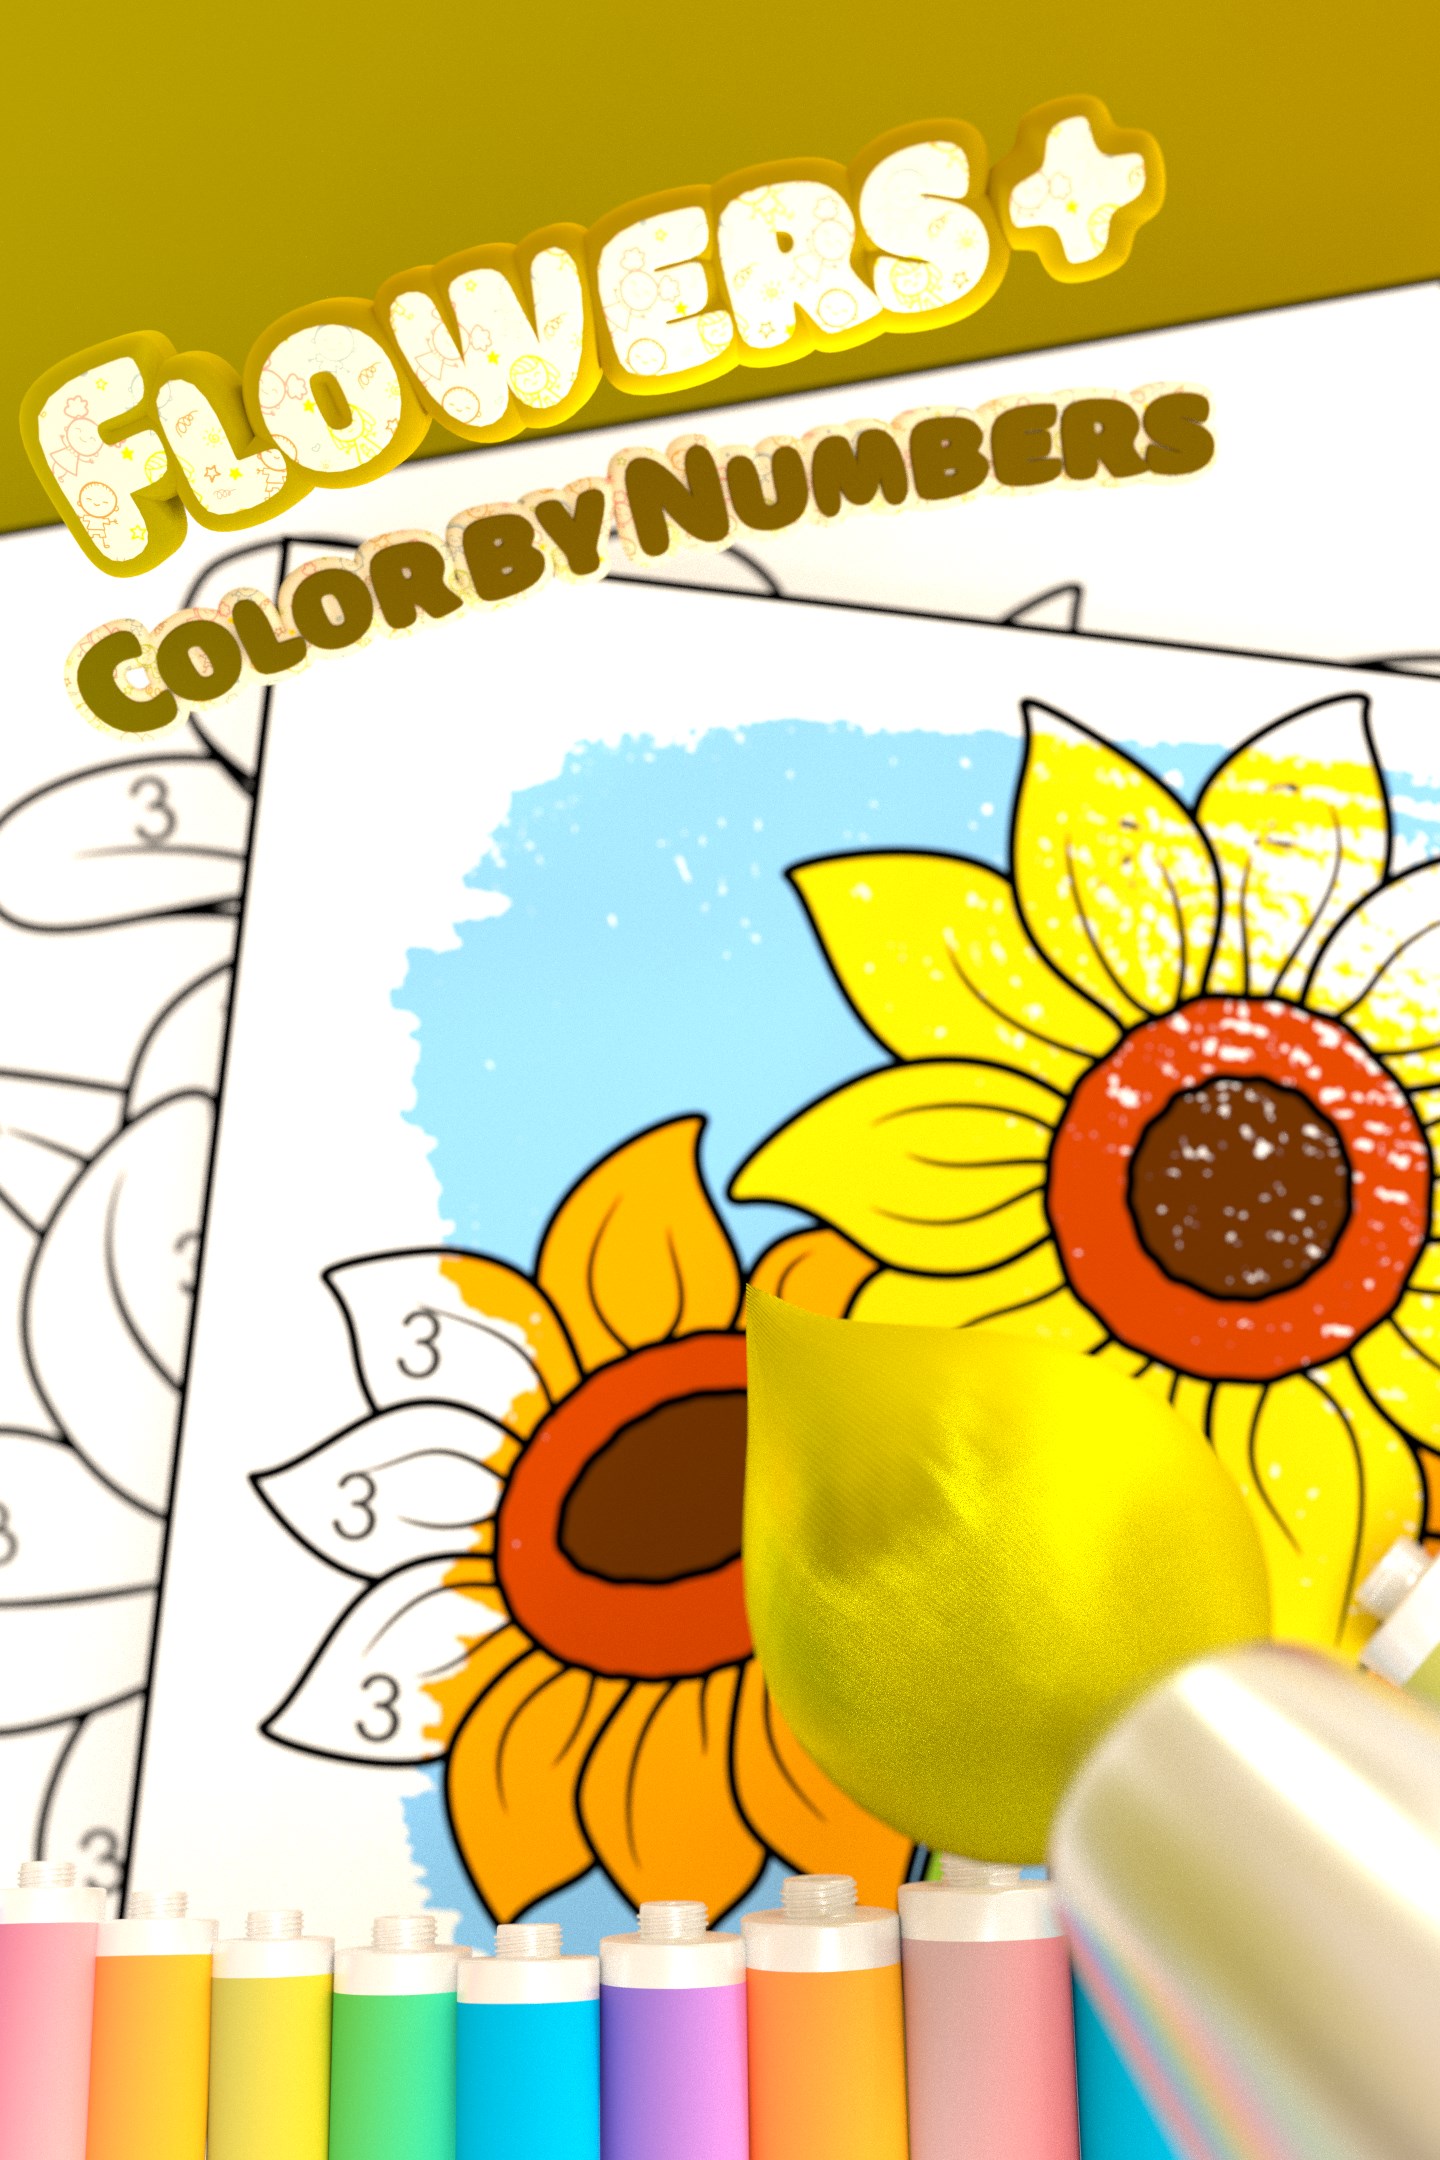 buy flowers - color by numbers + - microsoft store